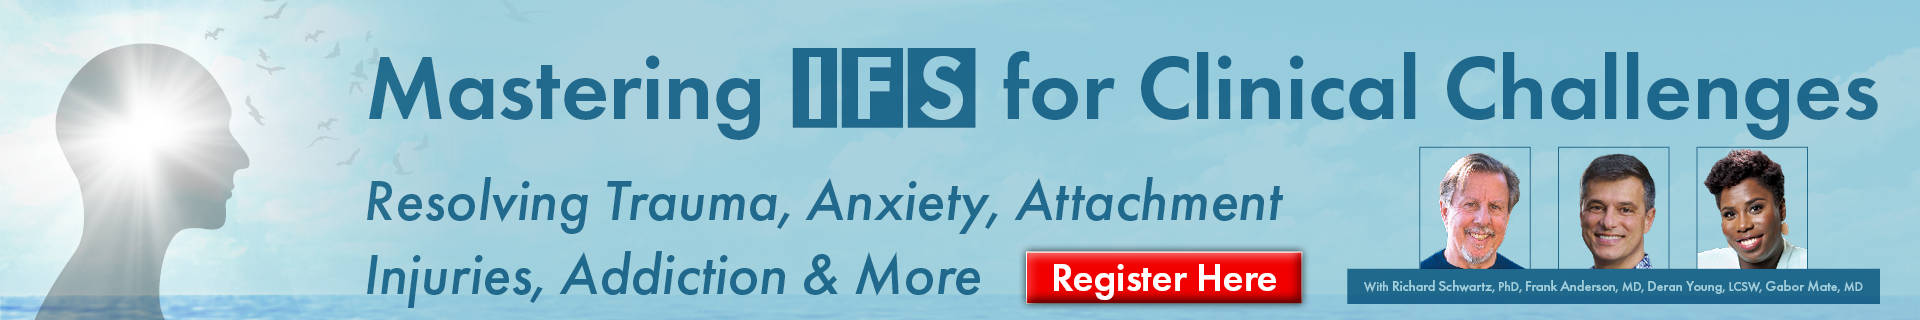 Mastering IFS for Clinical Challenges: Resolving Trauma, Anxiety, Attachment Injuries, Addiction & More